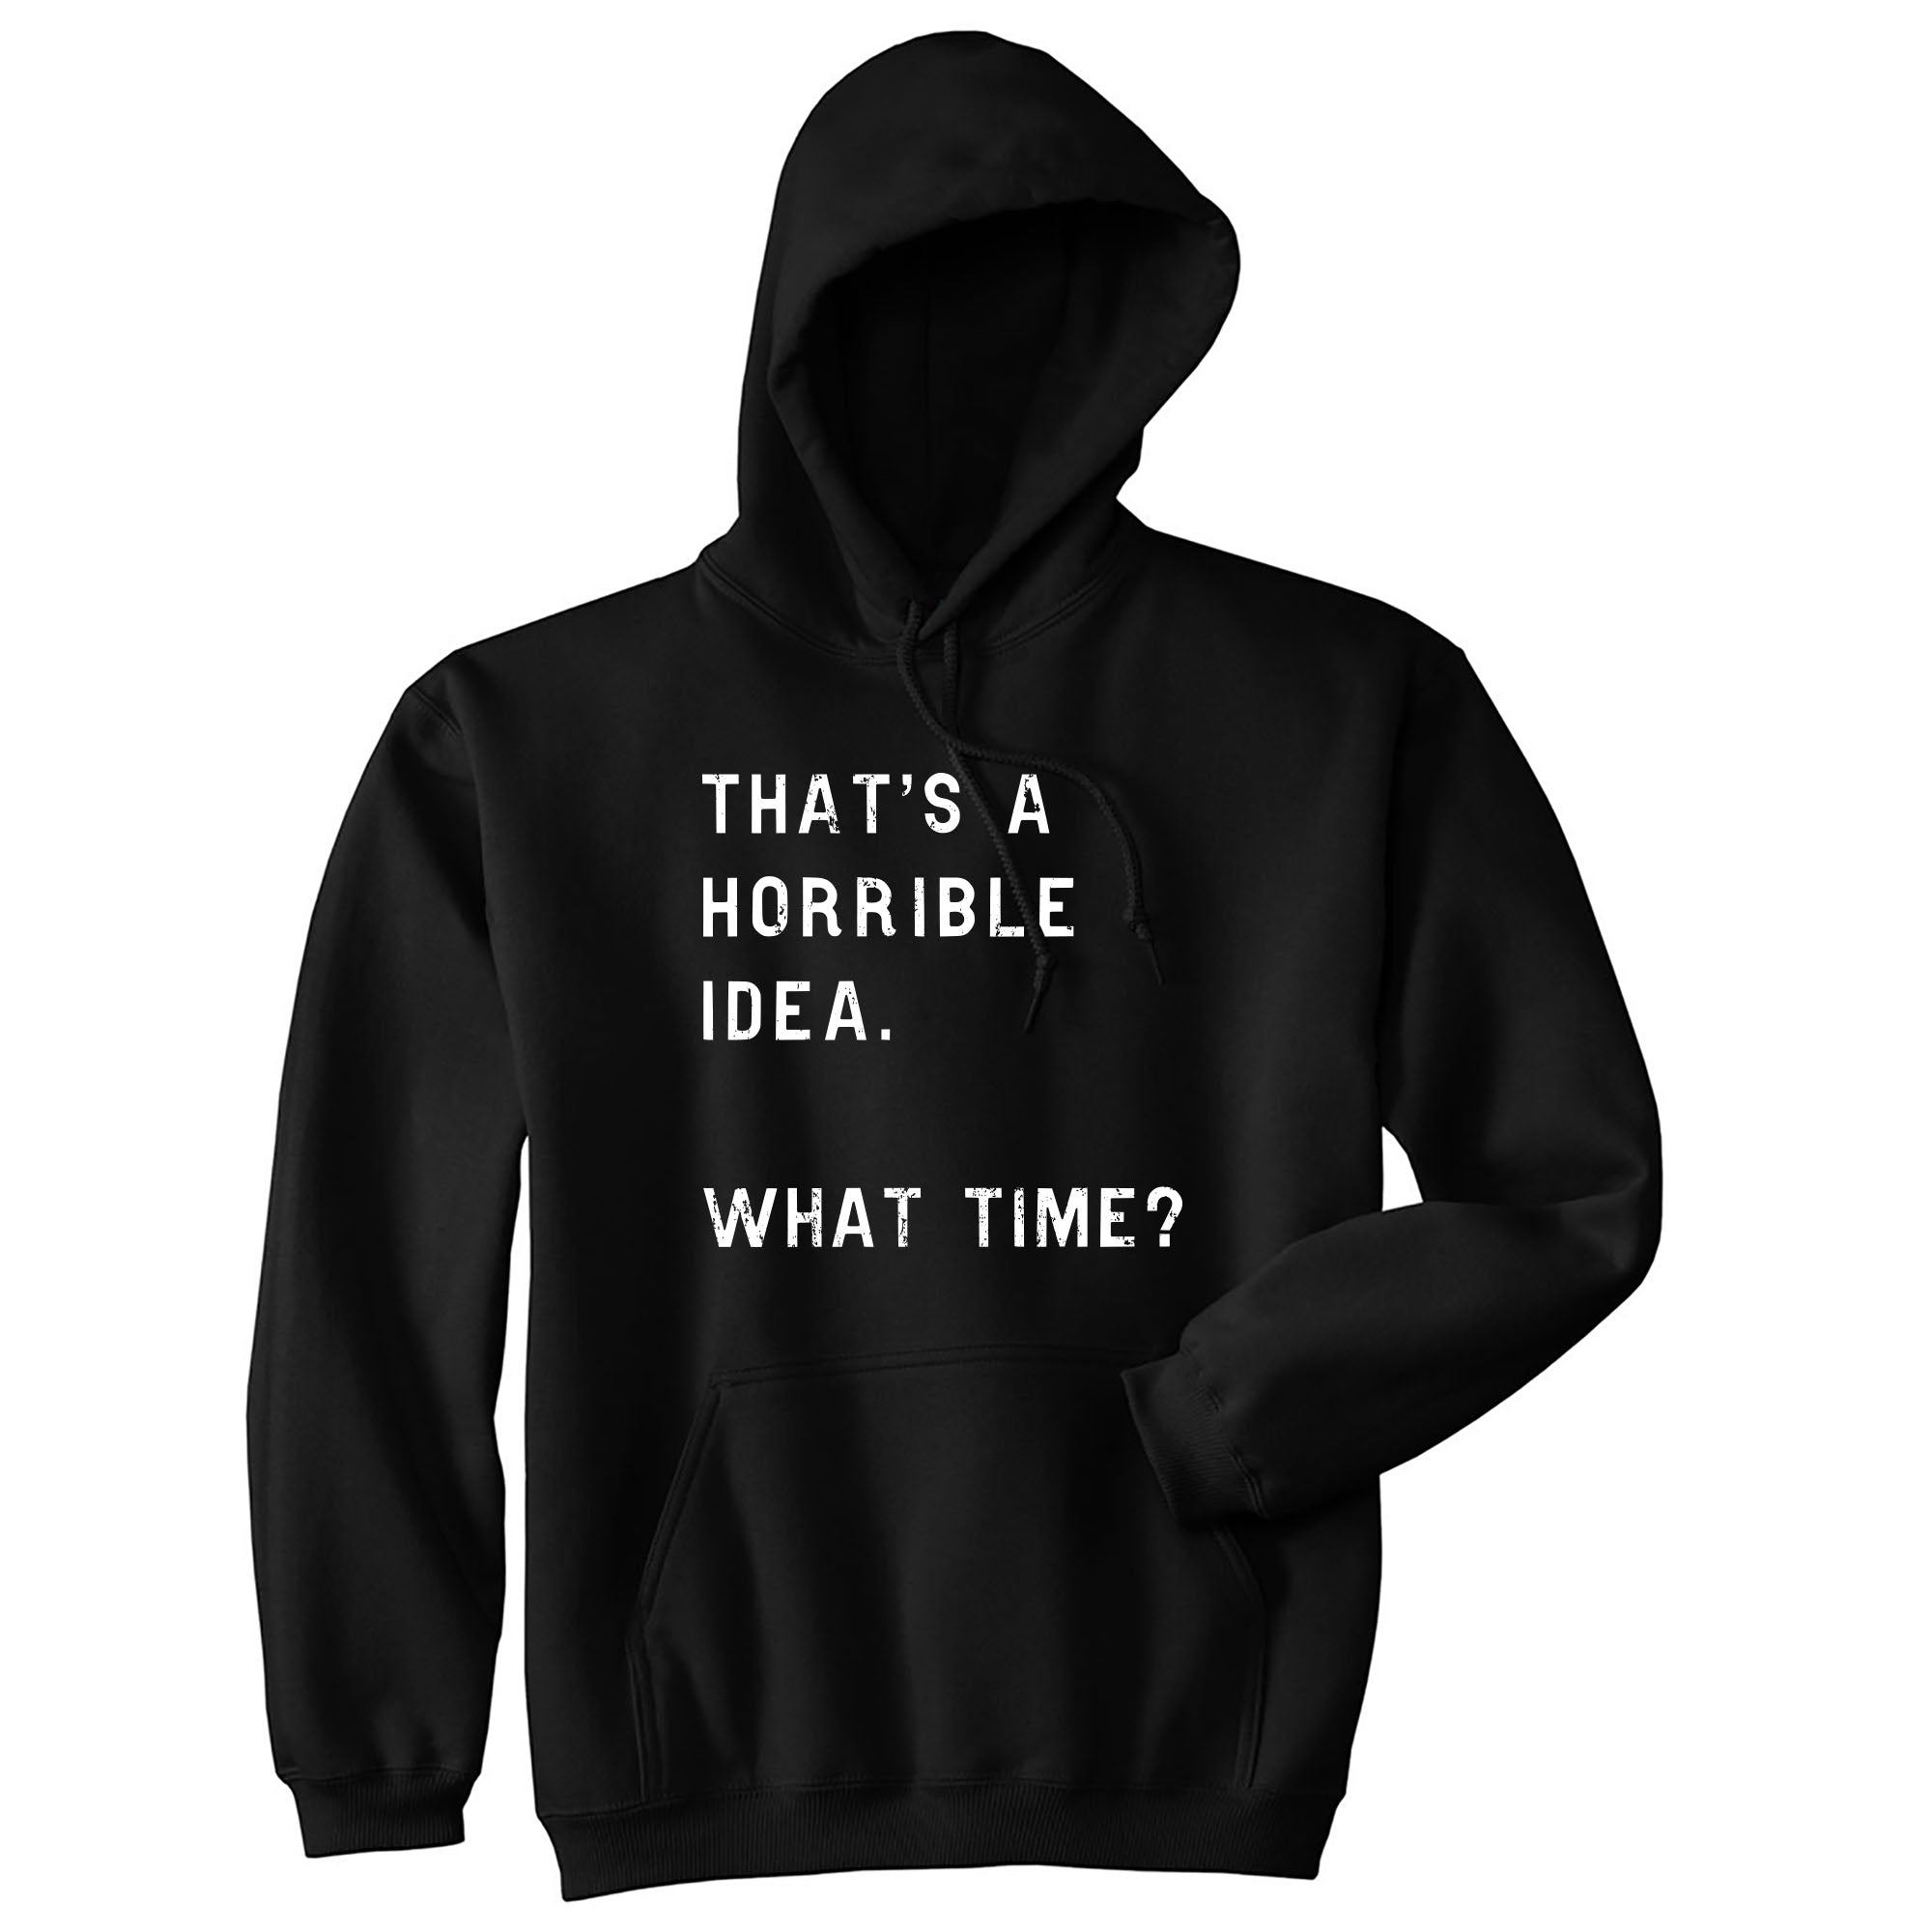 Funny Black - Horrible Idea That's A Horrible Idea What Time Hoodie Nerdy Sarcastic Tee